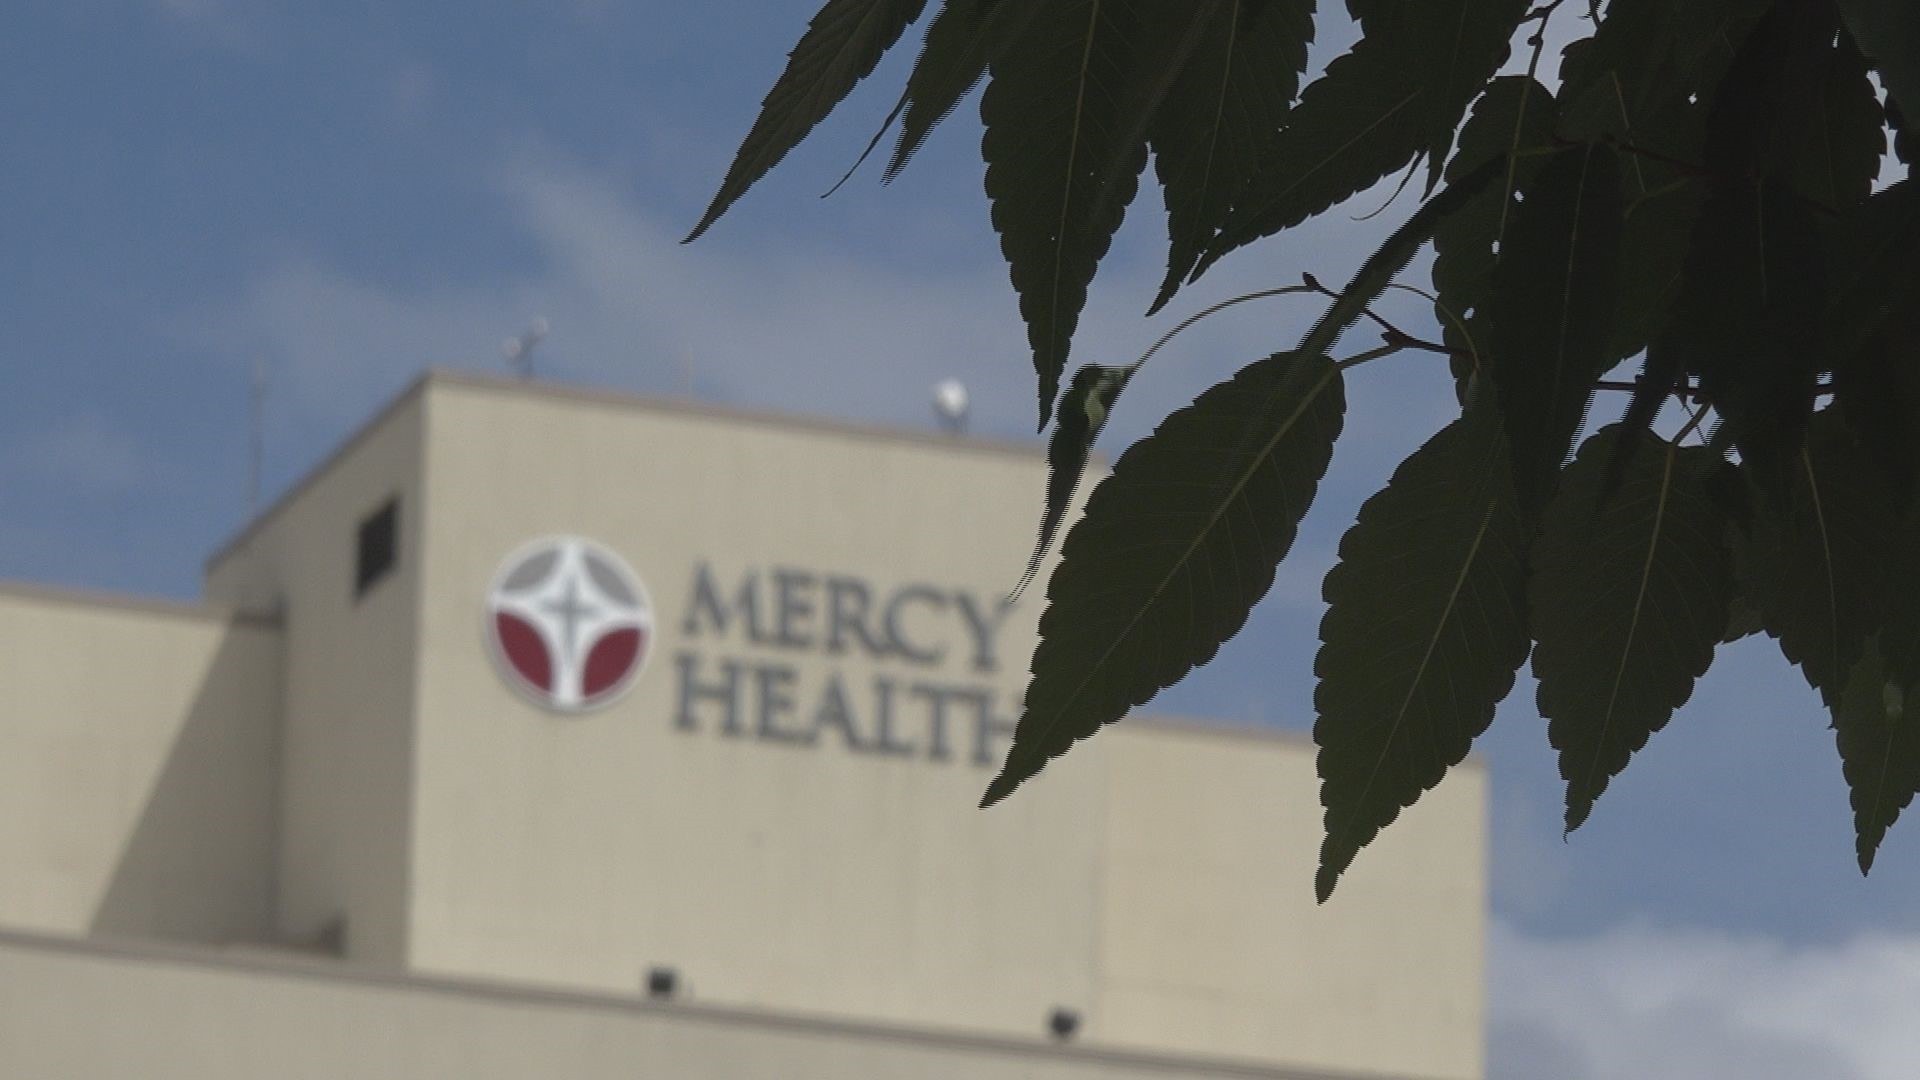 The BHCC is a partnership between Trinity Health Saint Mary's and Network180. It will be located in the Trinity Health downtown campus with the goal to open in 2023.